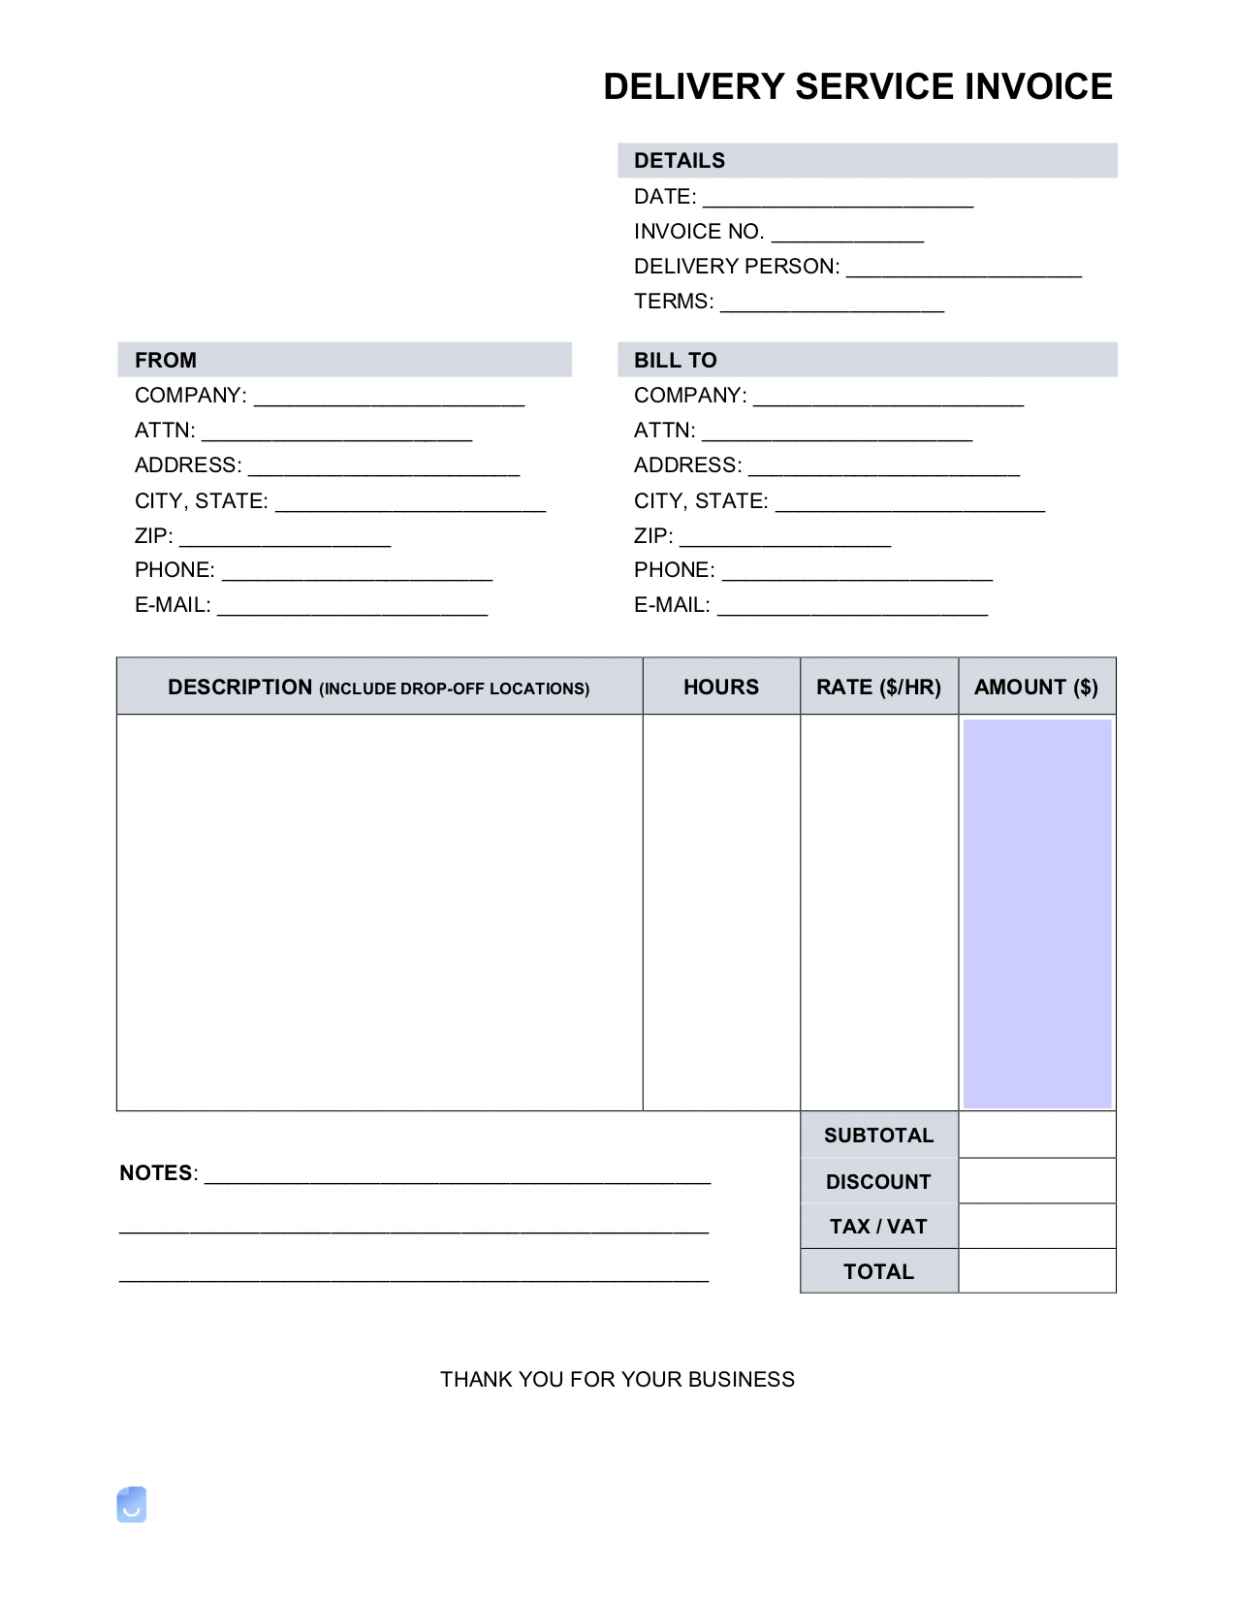 Sample Delivery Service Invoice Template Sample